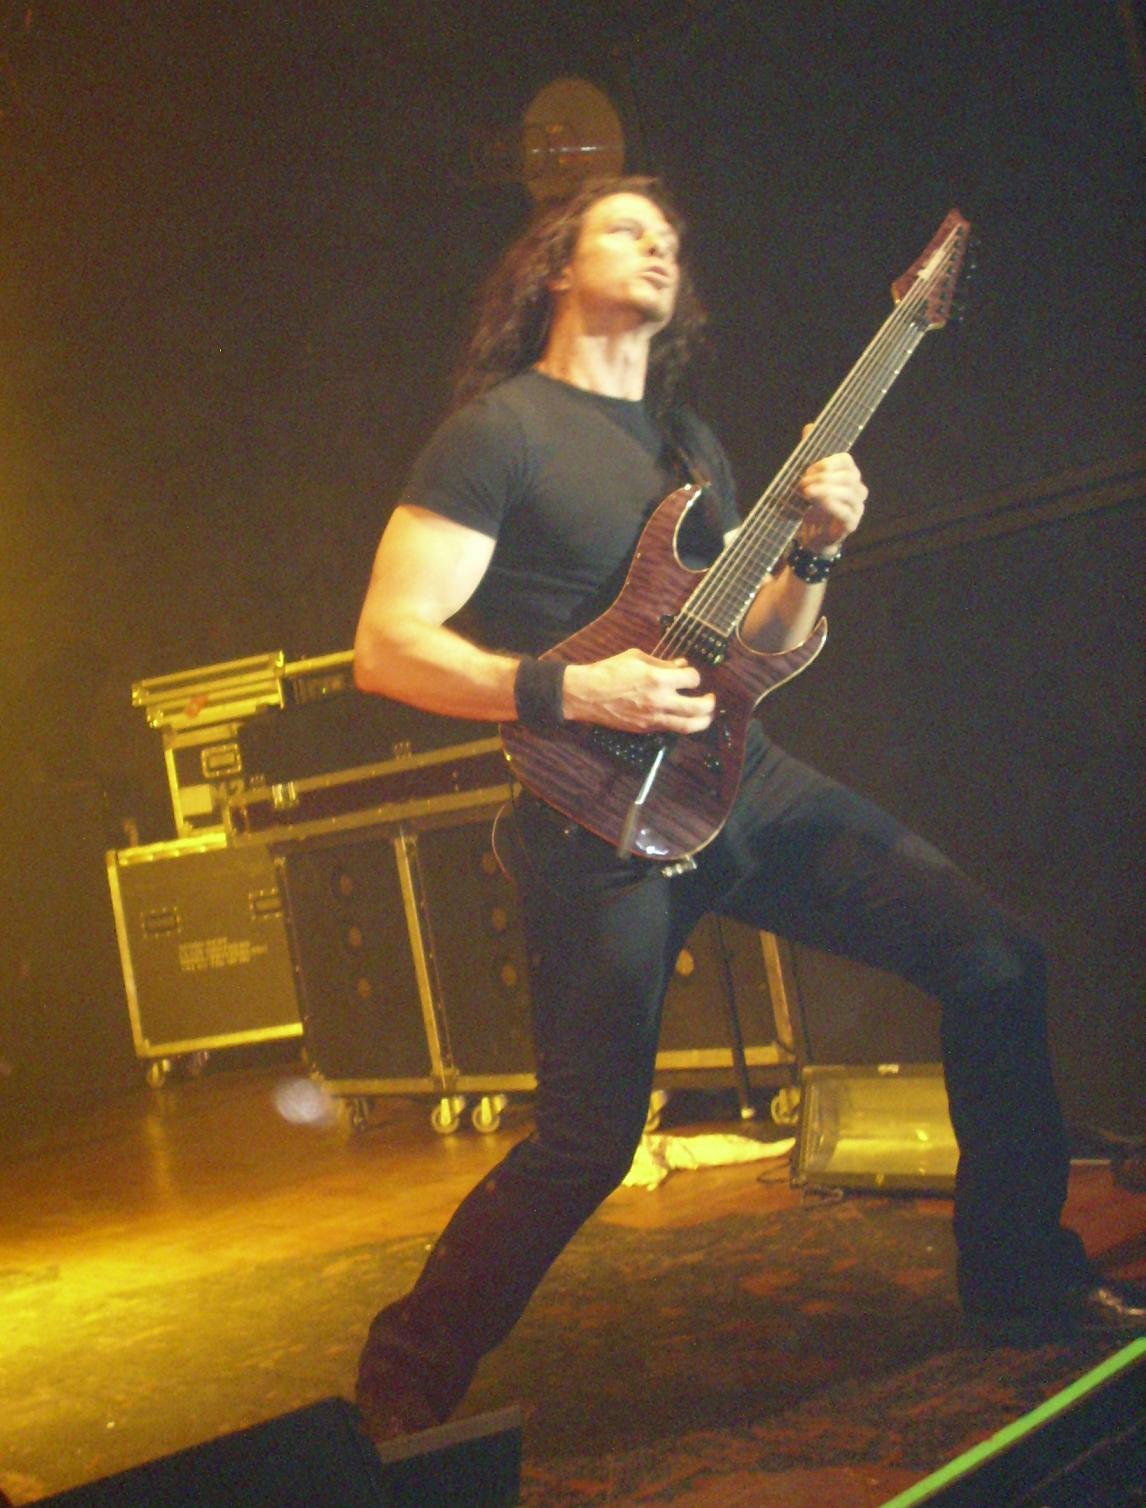 a man with long hair, holding an electric guitar on stage